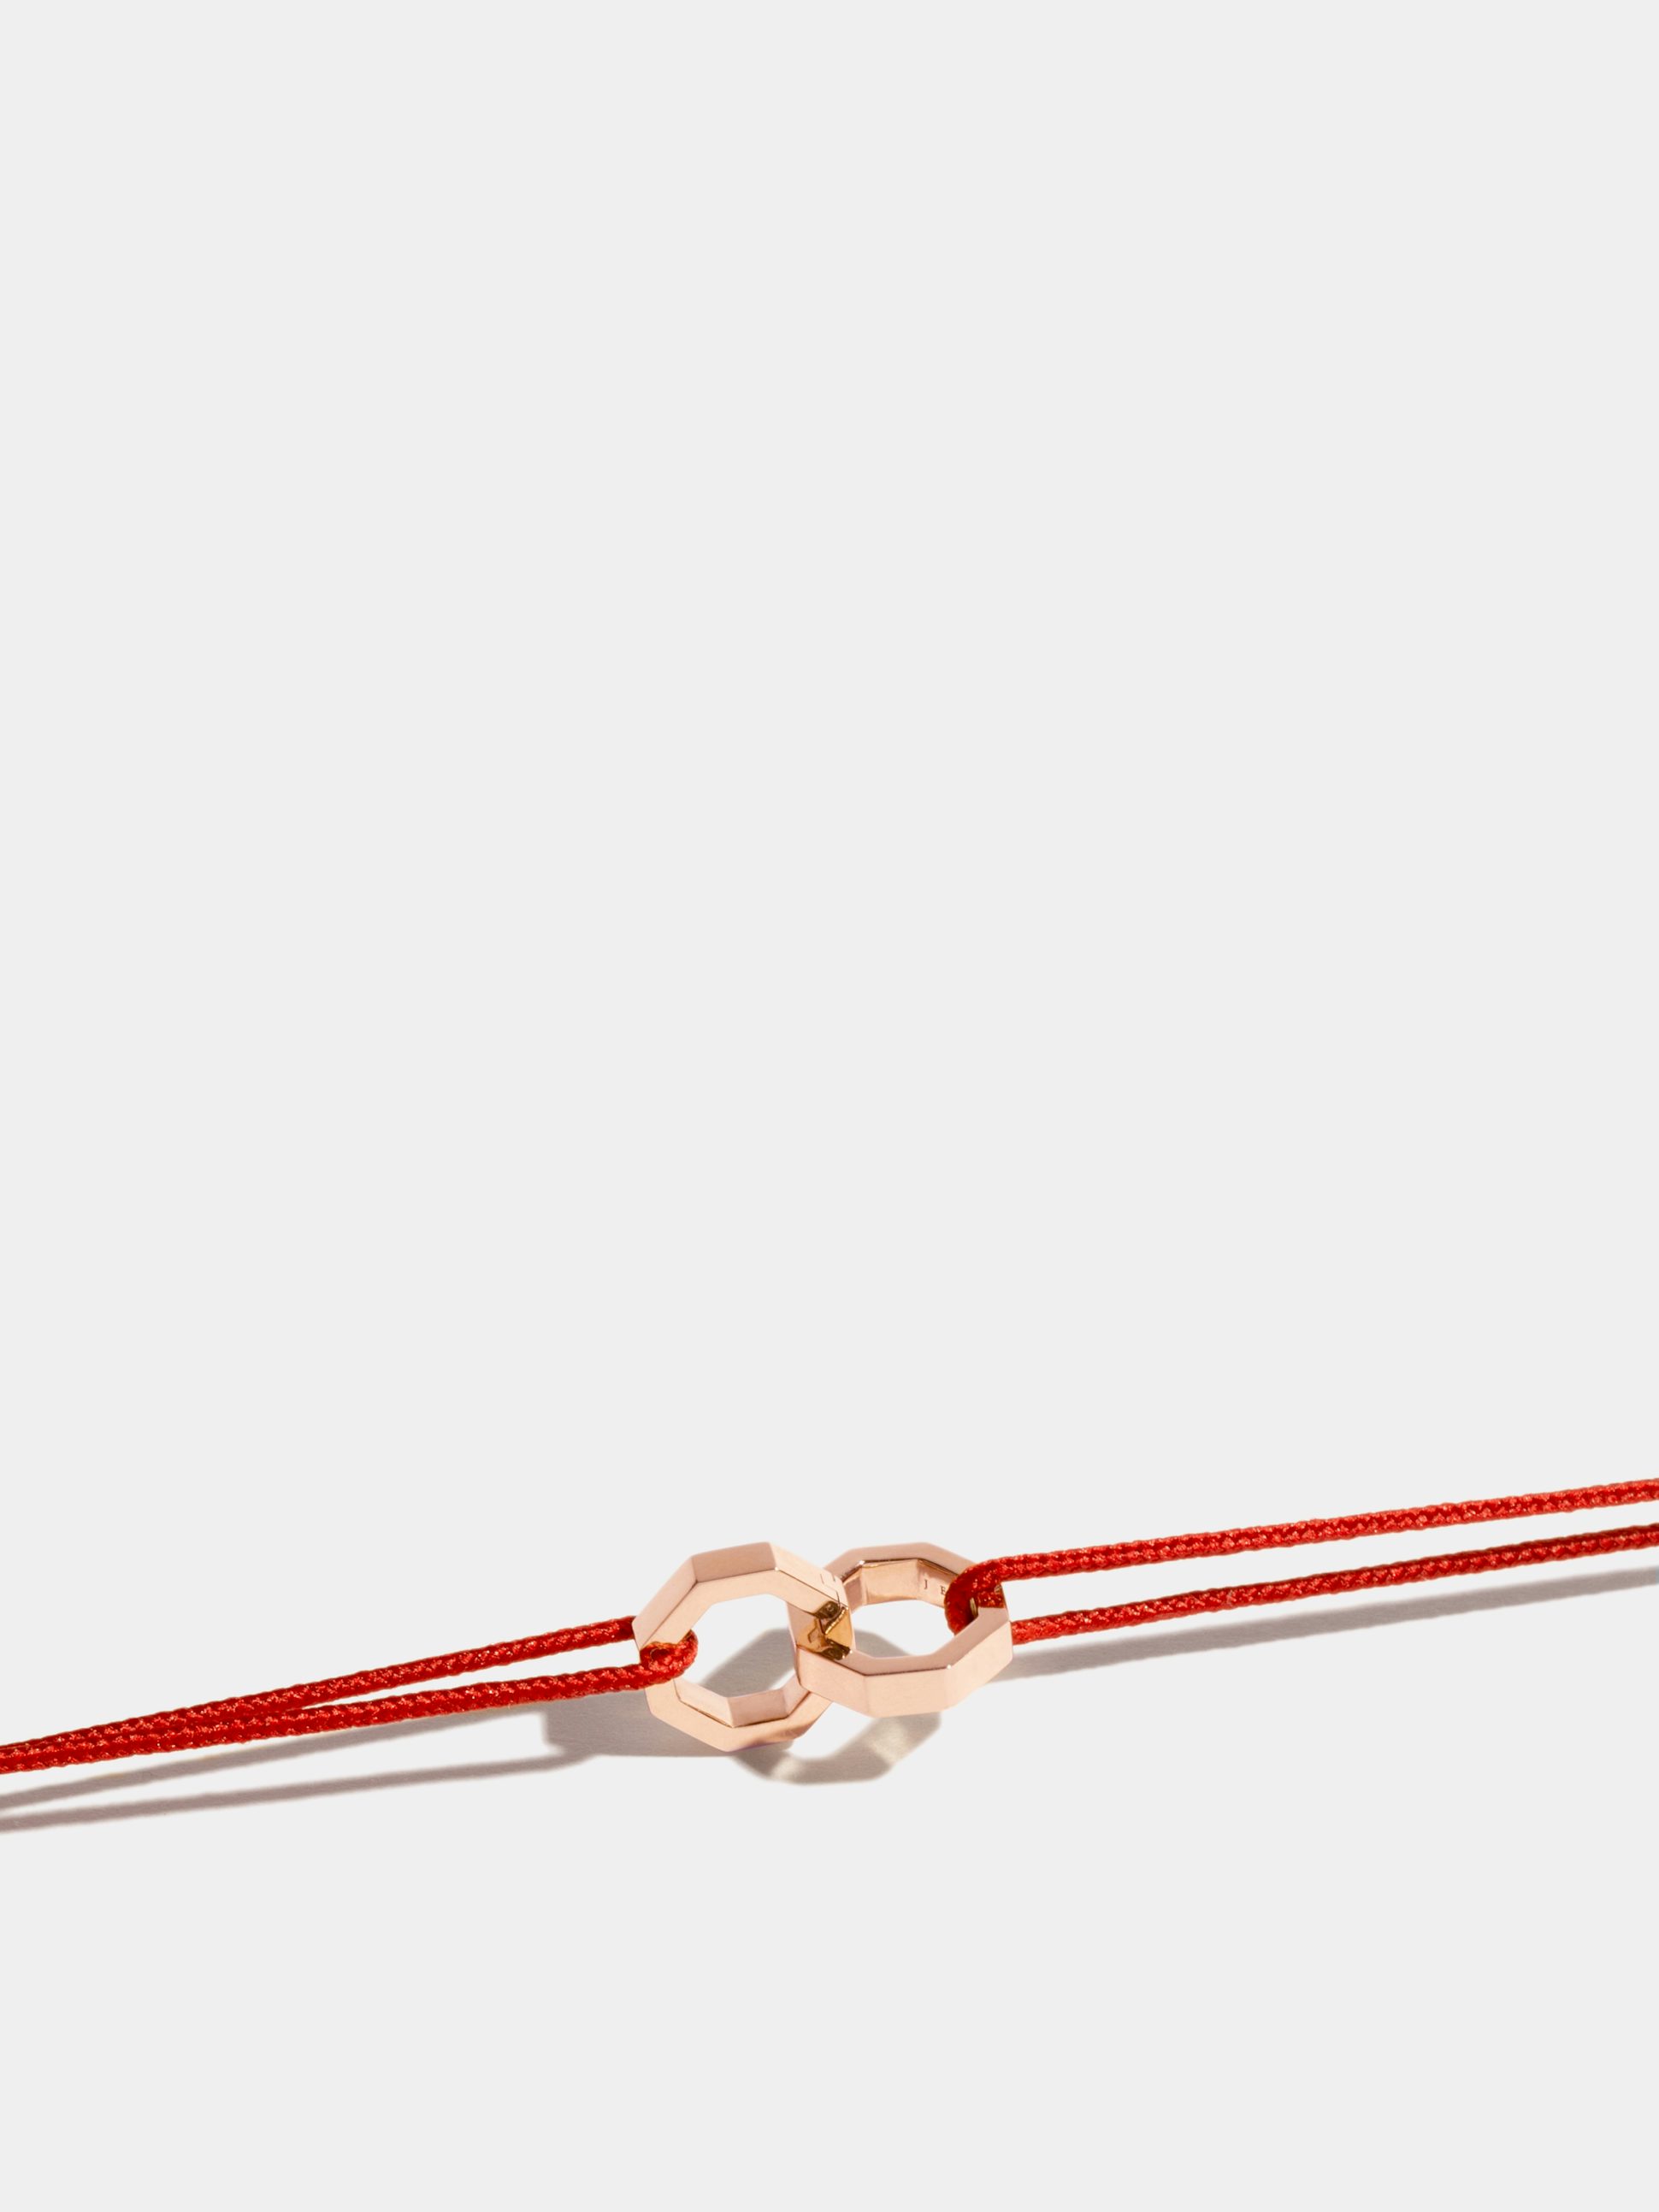 Double Octogone bracelet in 18k Fairmined ethical rose gold, on a red cord. 